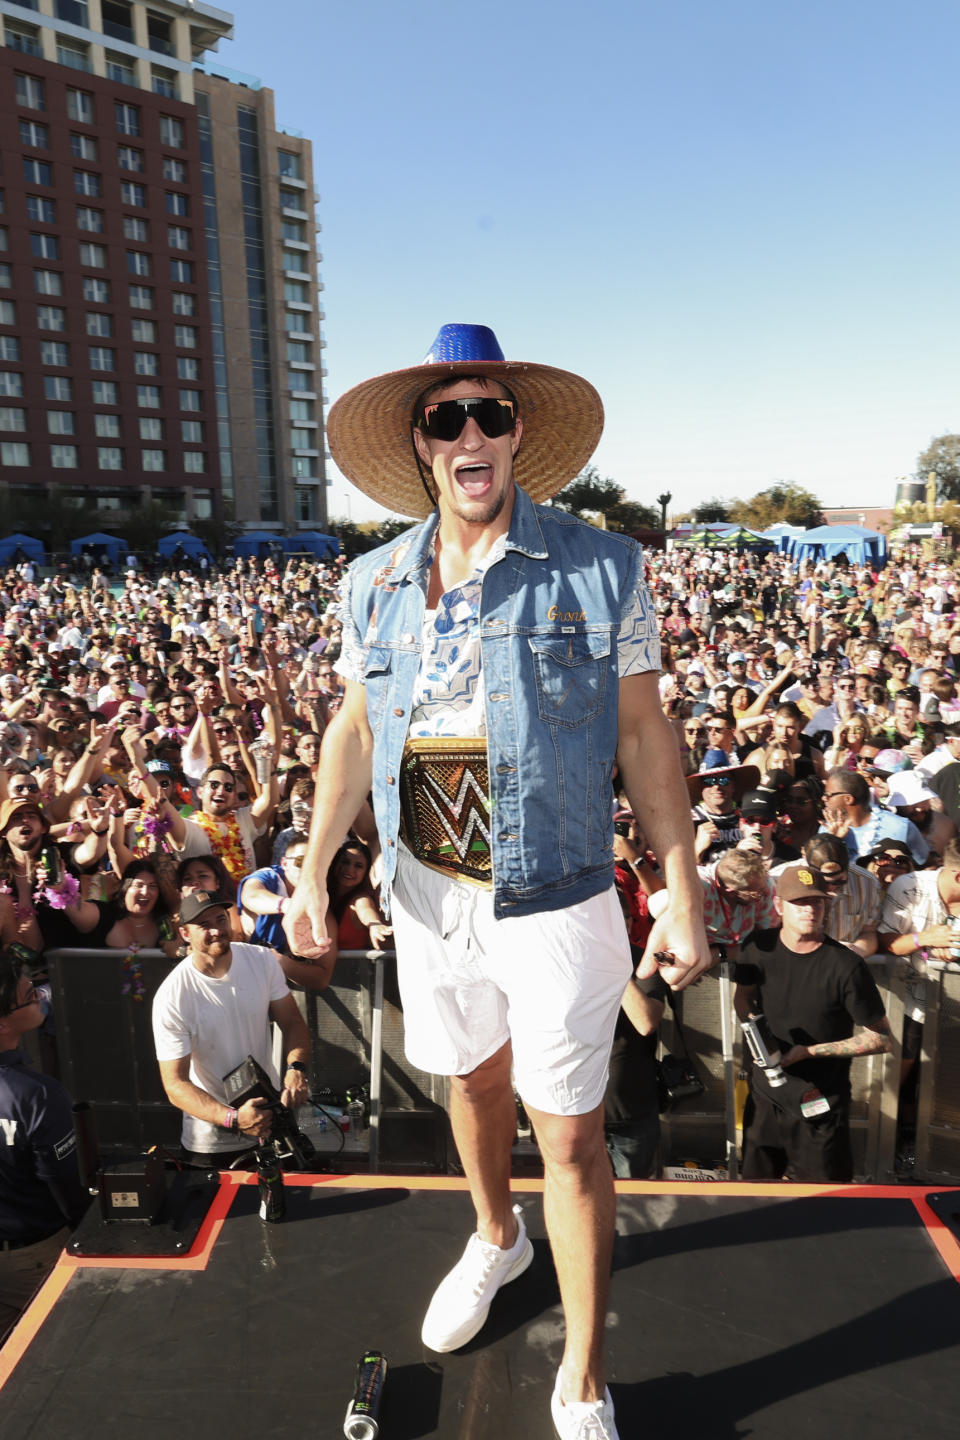 Rob Gronkowski onstage at Gronk Beach presented by The Beast Unleashed held at Talking Stick Resort on February 11, 2023 in Scottsdale, Arizona.